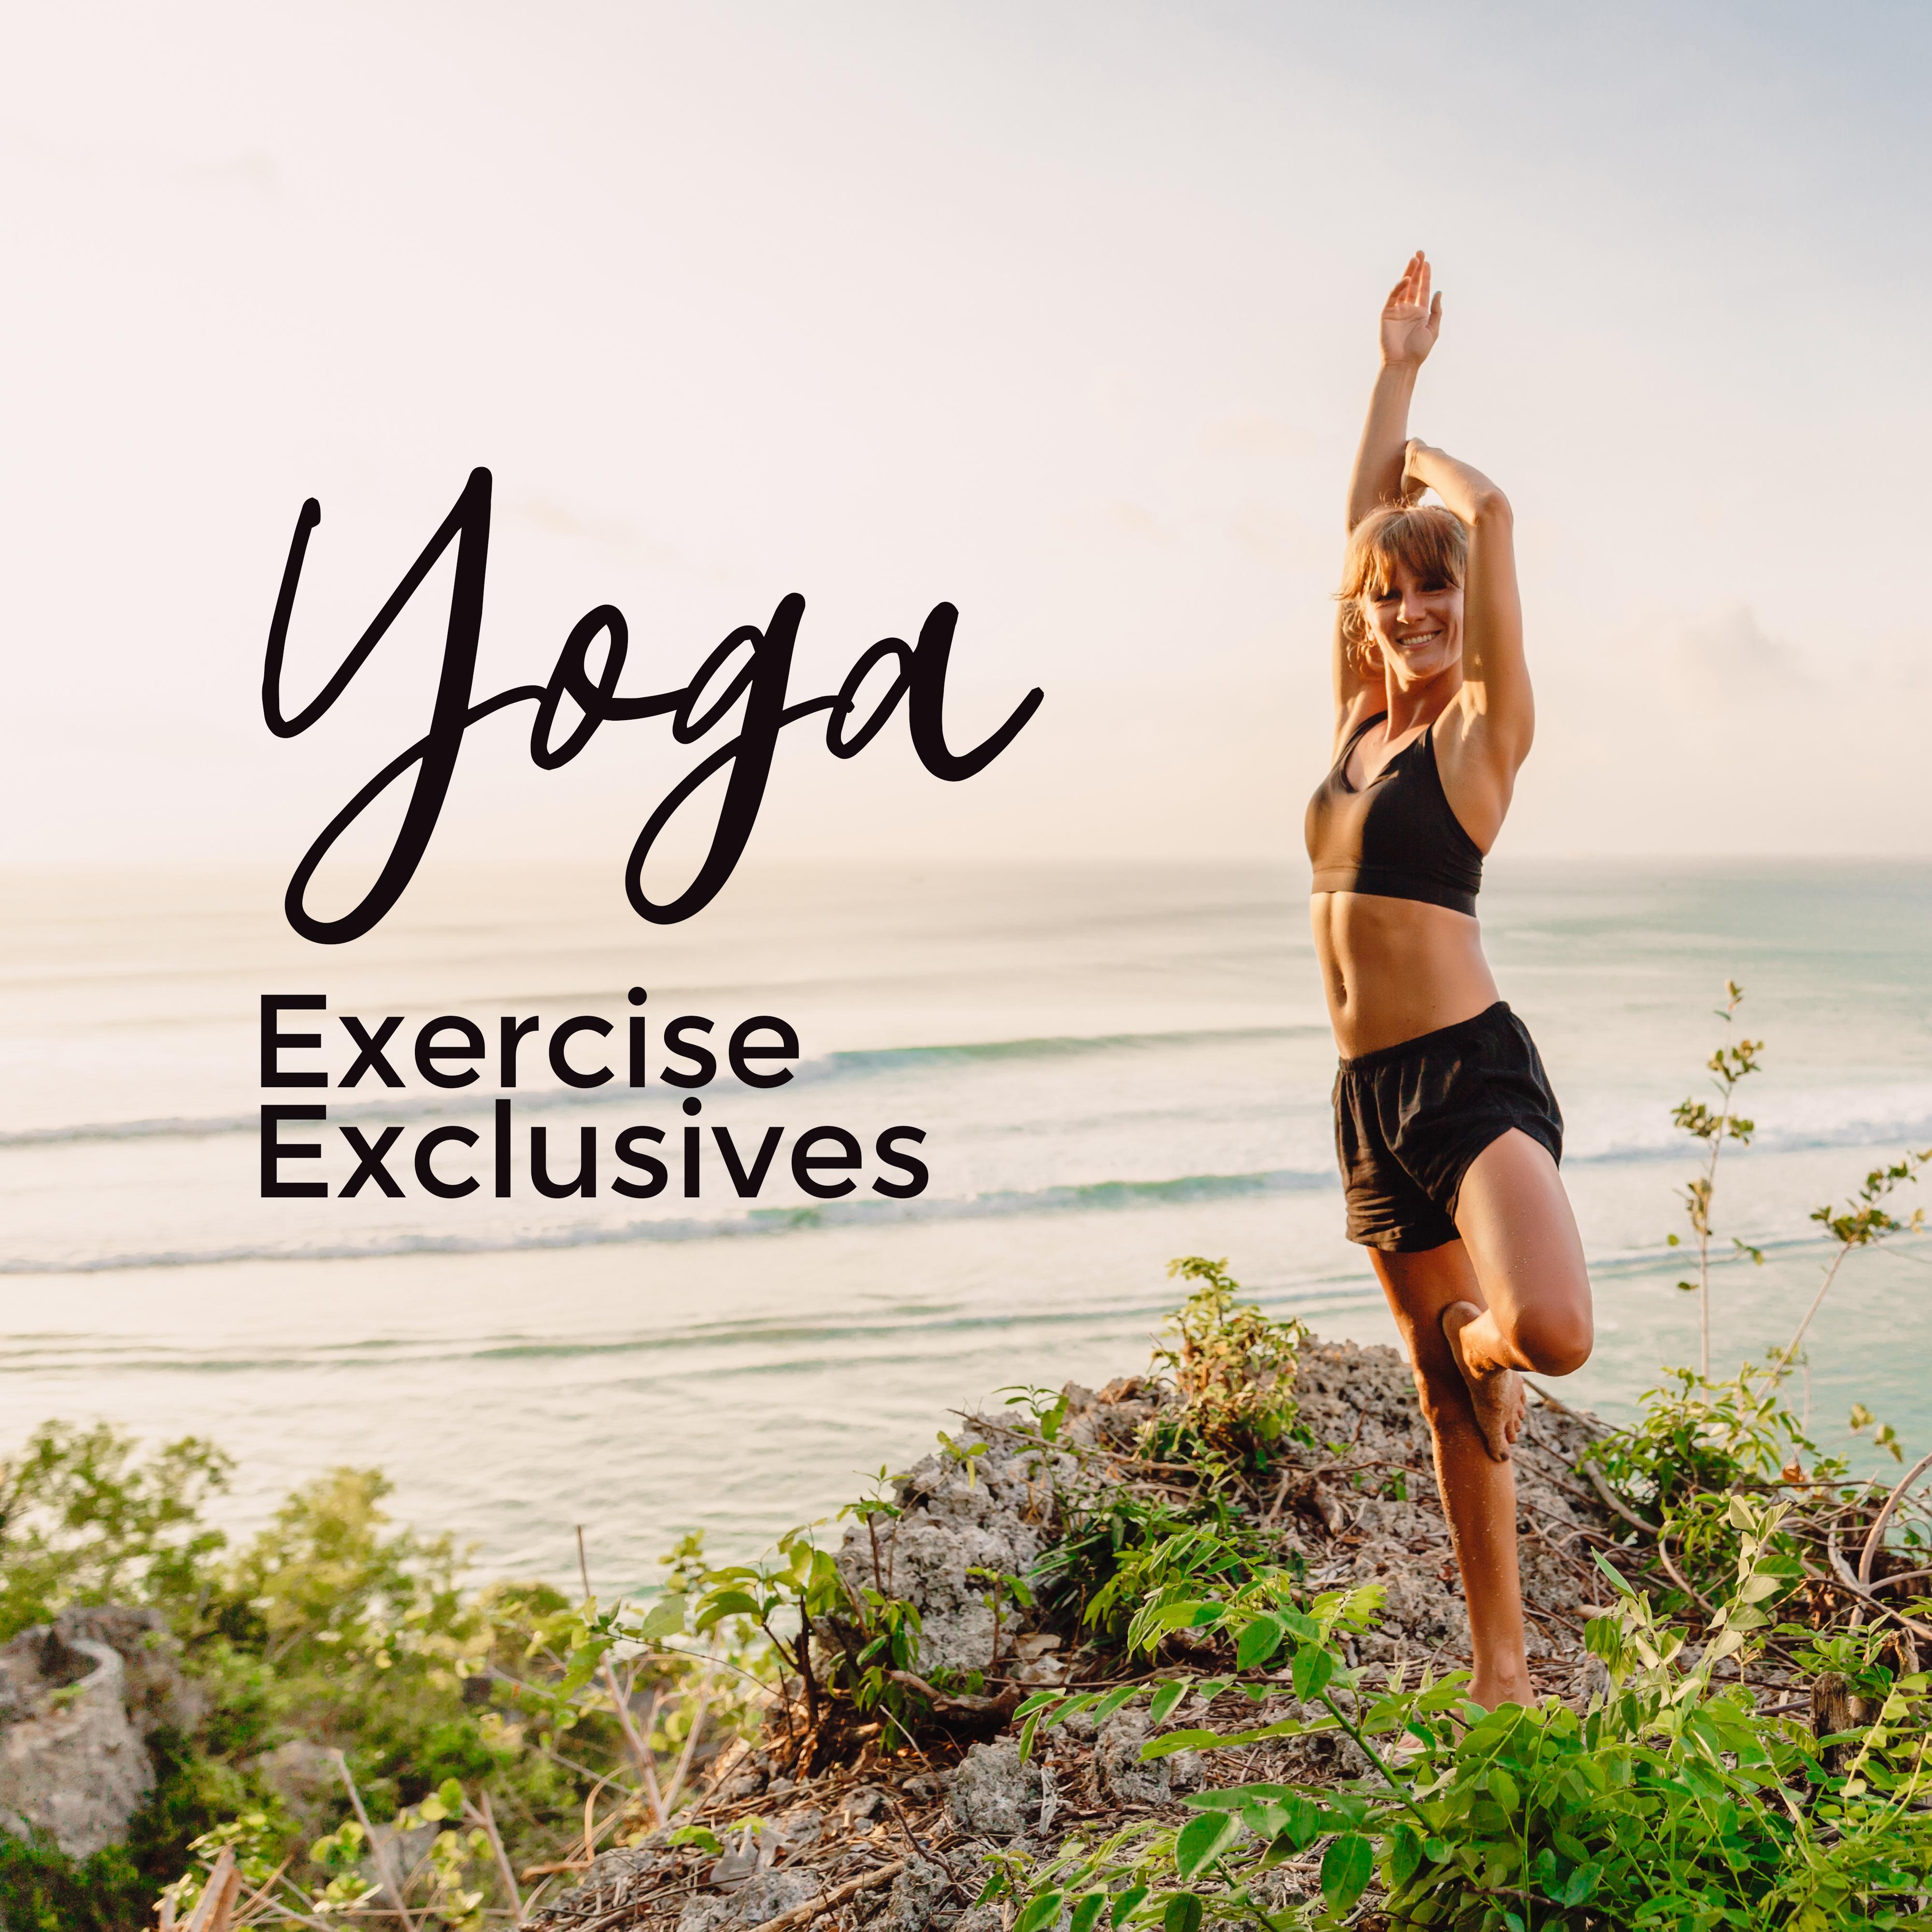 Yoga Exercise Exclusives  Yoga Training, Meditation Music to Calm Down, Mindfluness Relaxation, Yoga Healing Music, Yoga Meditation, Kundalini Awakening, Pure Zen